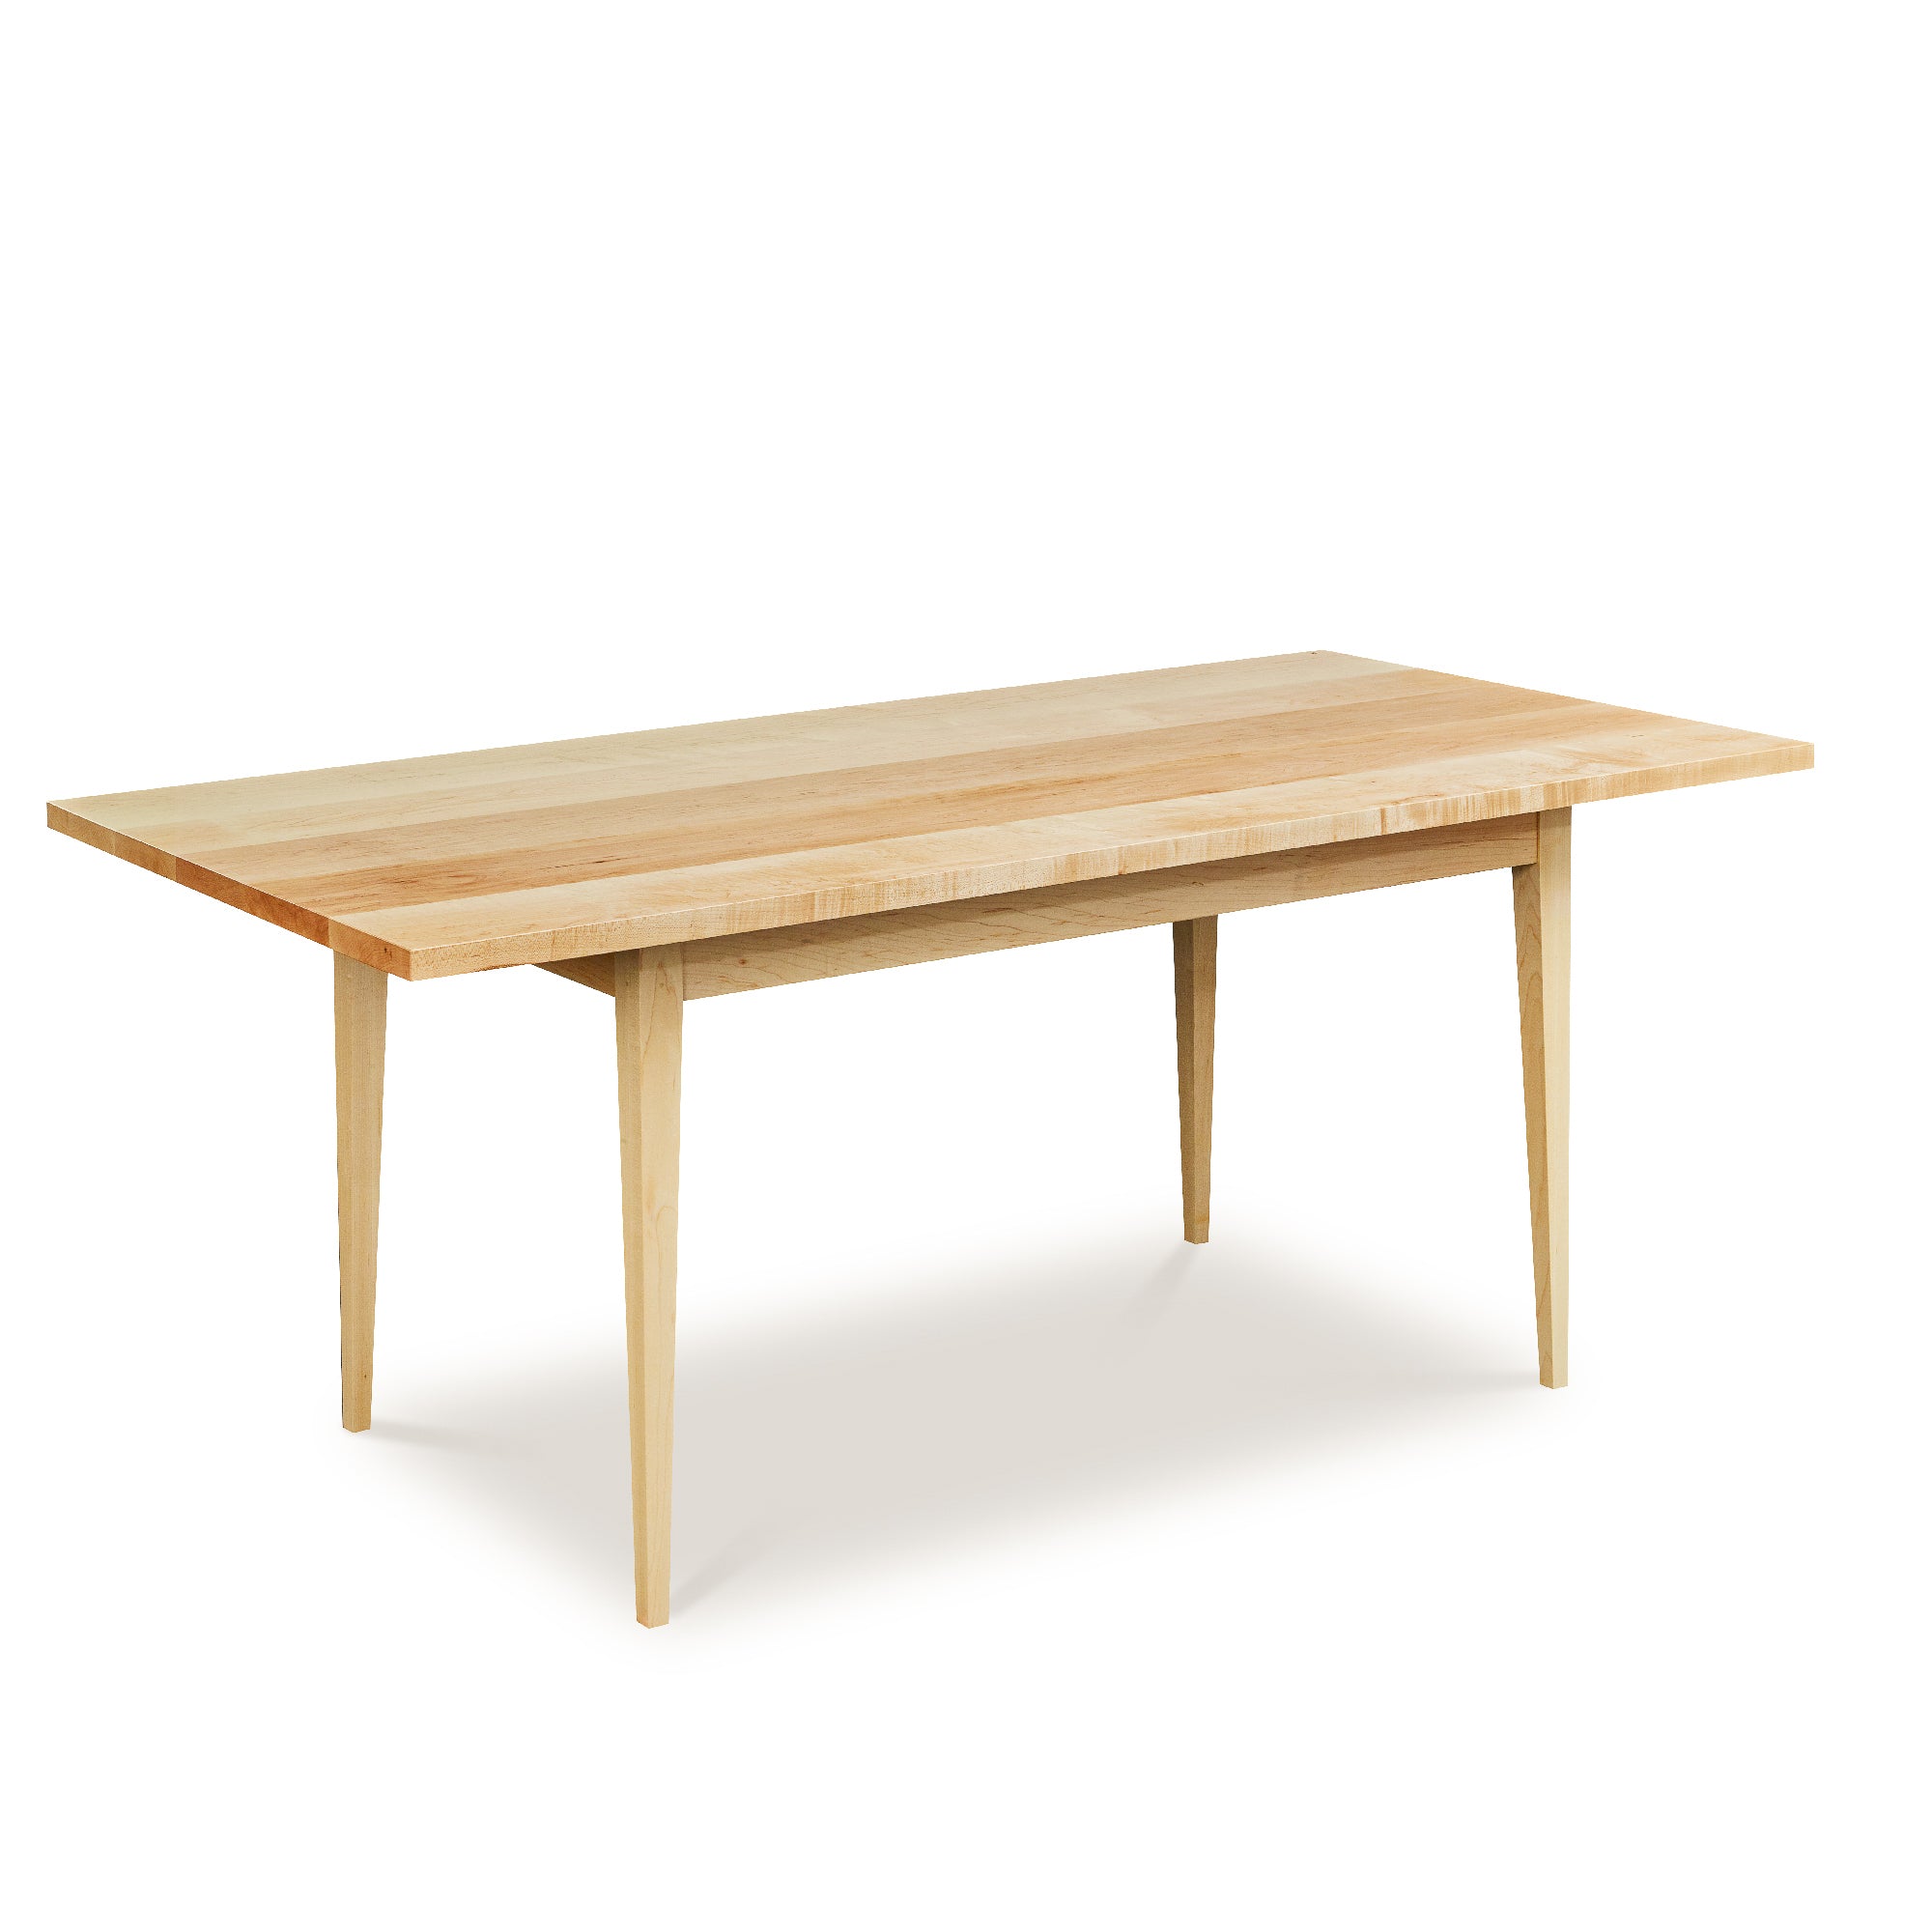 Solid top Shaker inspired dining table made of solid maple wood from Maine's Chilton Furniture Co.